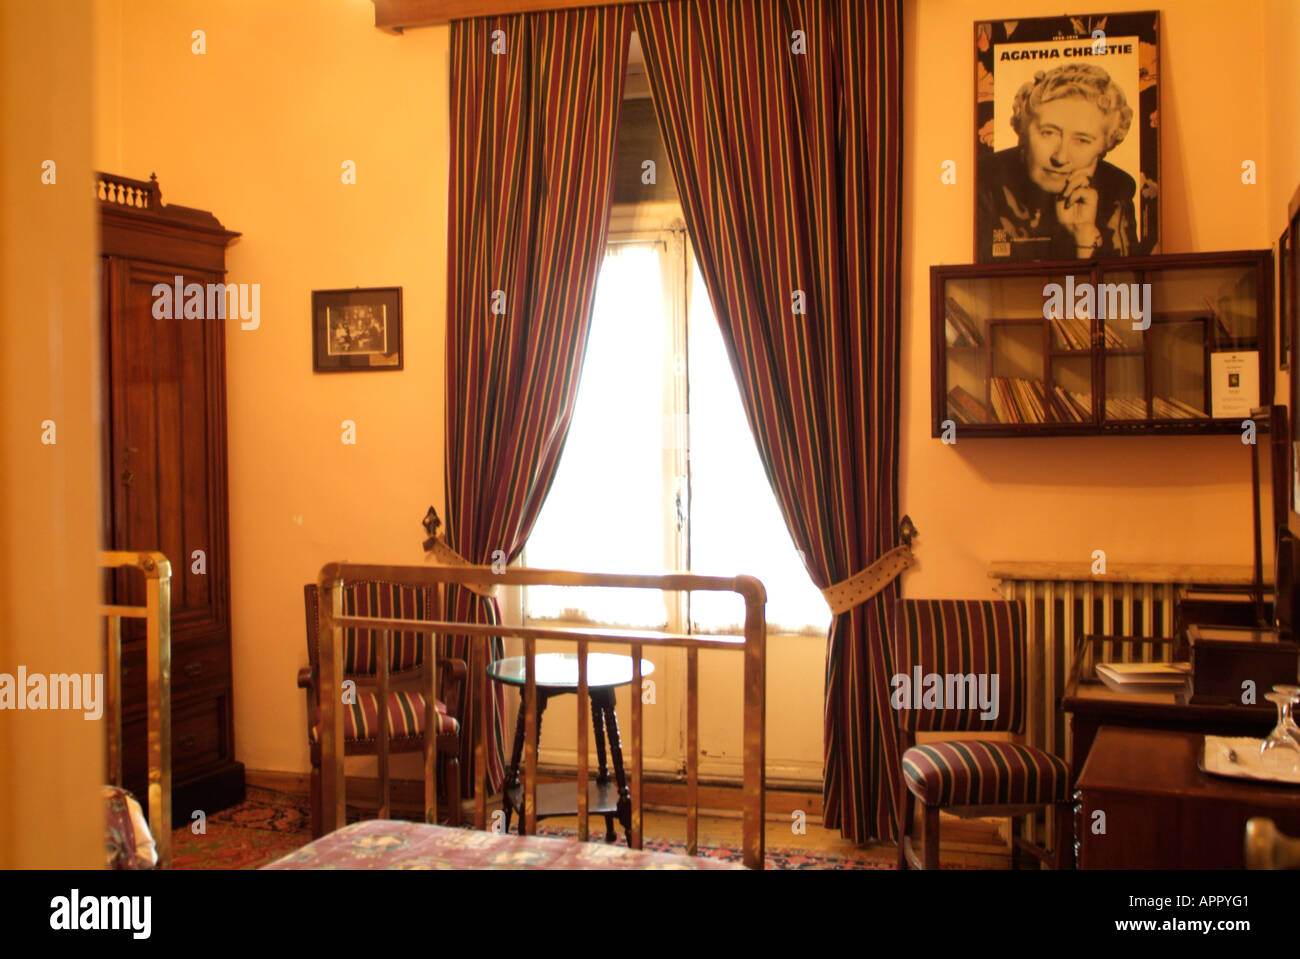 Agatha Christie's room at Pera Palas Hotel in Istanbul, Turkey Stock Photo